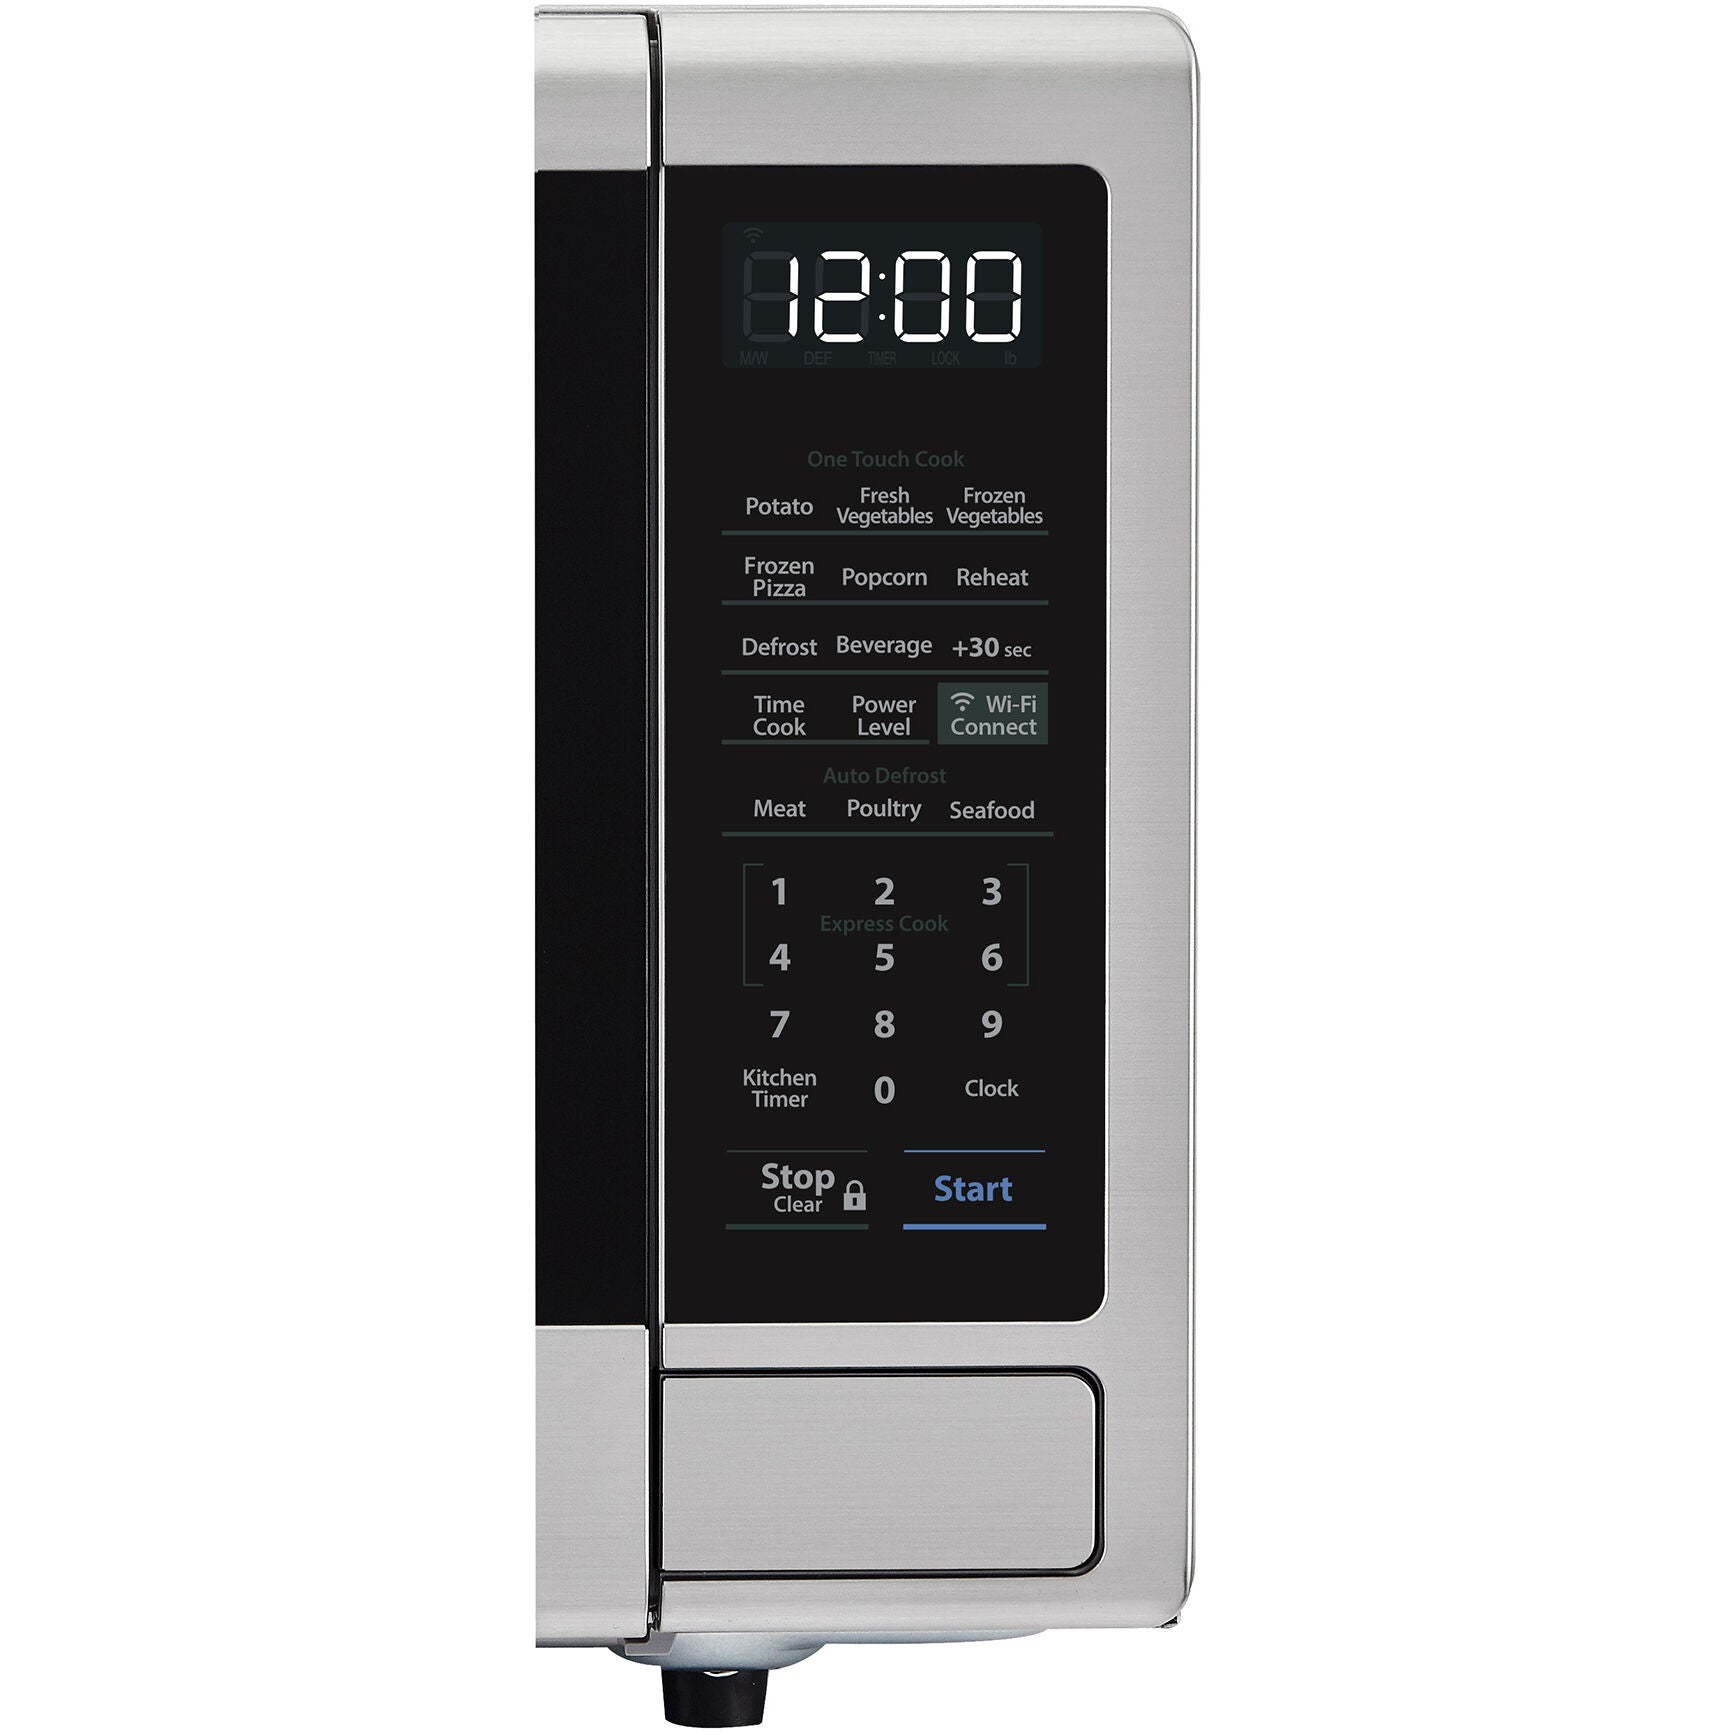 Sharp 1.1-Cu. Ft. 21 in. Countertop Microwave with Alexa-Enabled Controls in Stainless Steel (ZSMC1139FS)